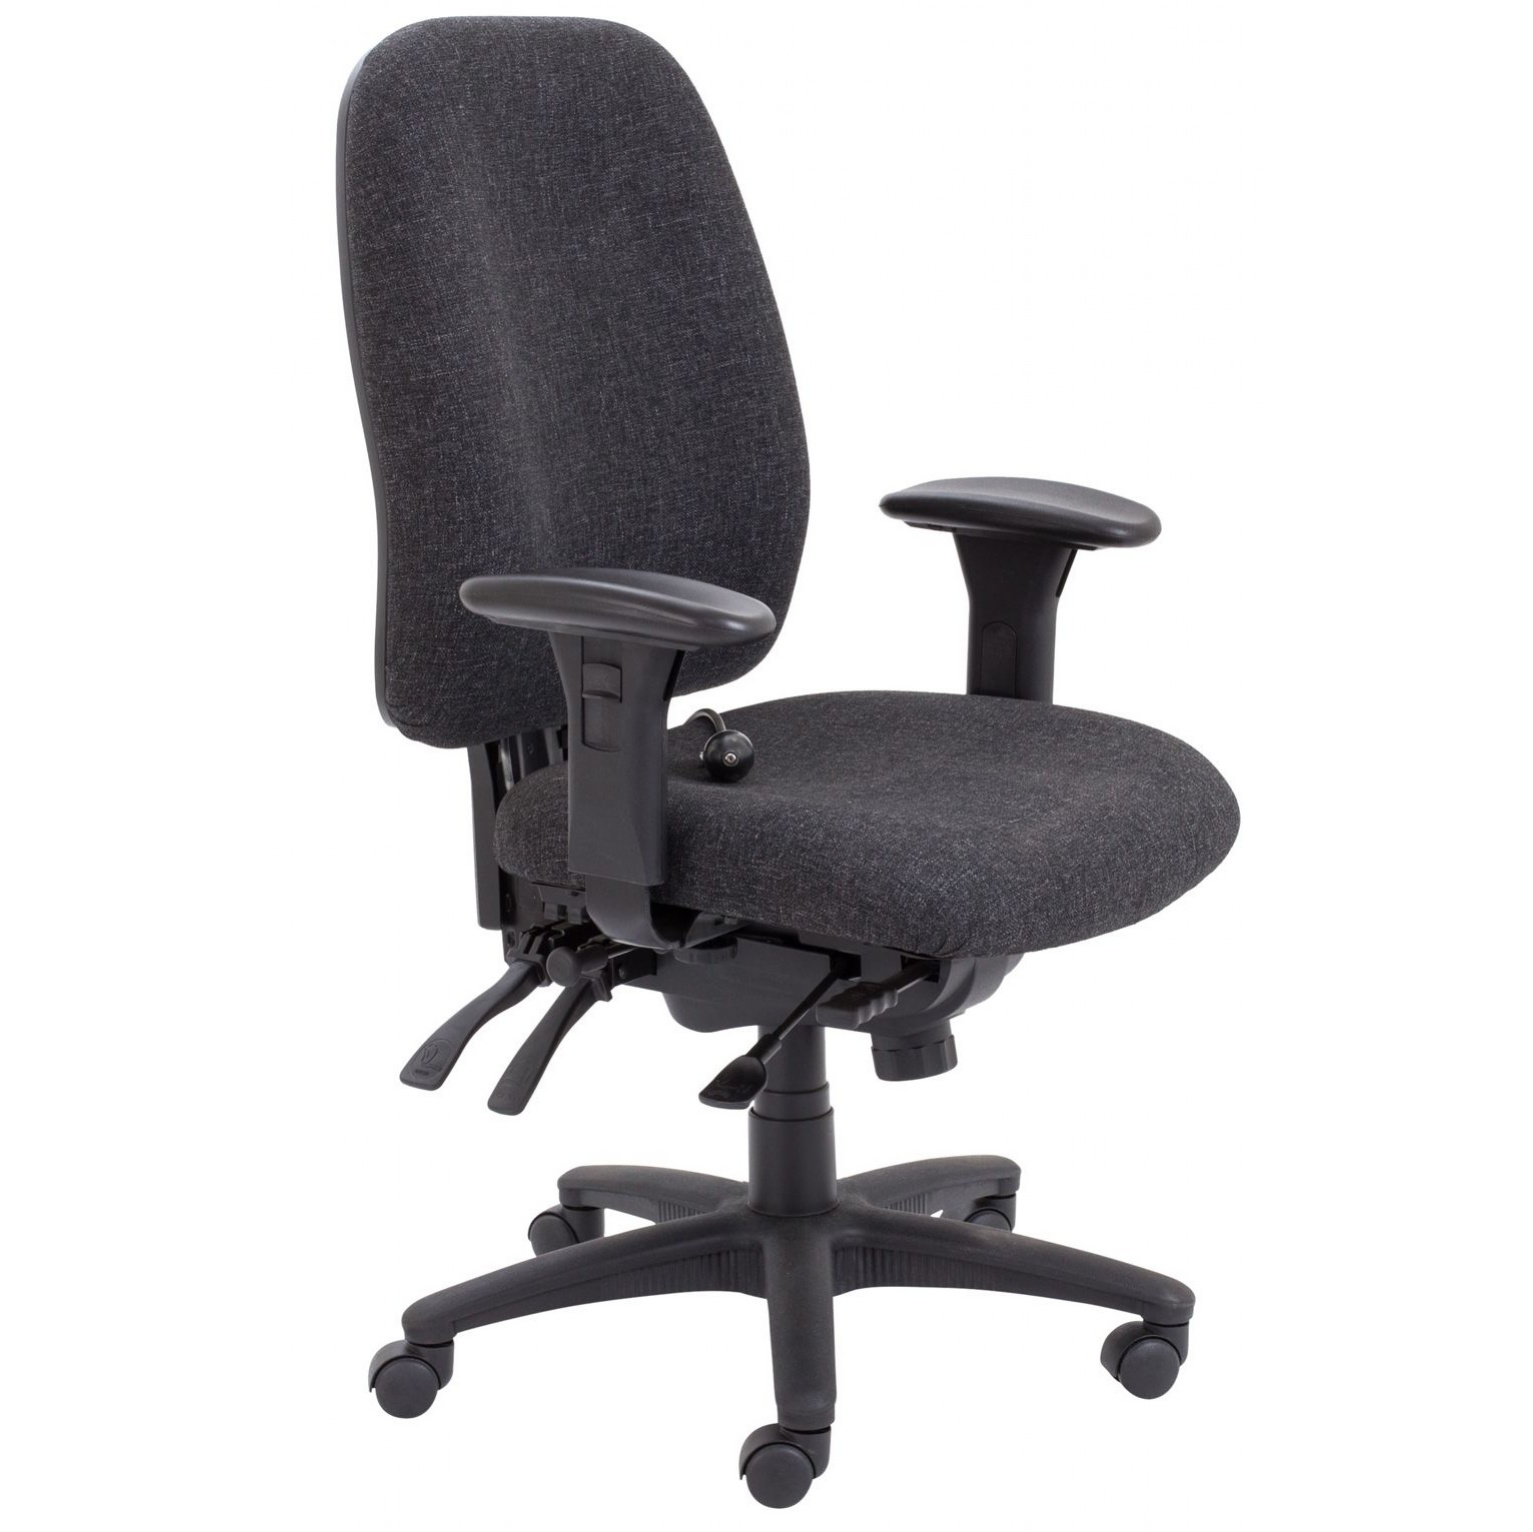 Ratchet Back Asynchro Mechanism Black Office Hippo Professional 24 High Back Office Chair 150 kg Weight Tolerance 2D Arms Fabric 